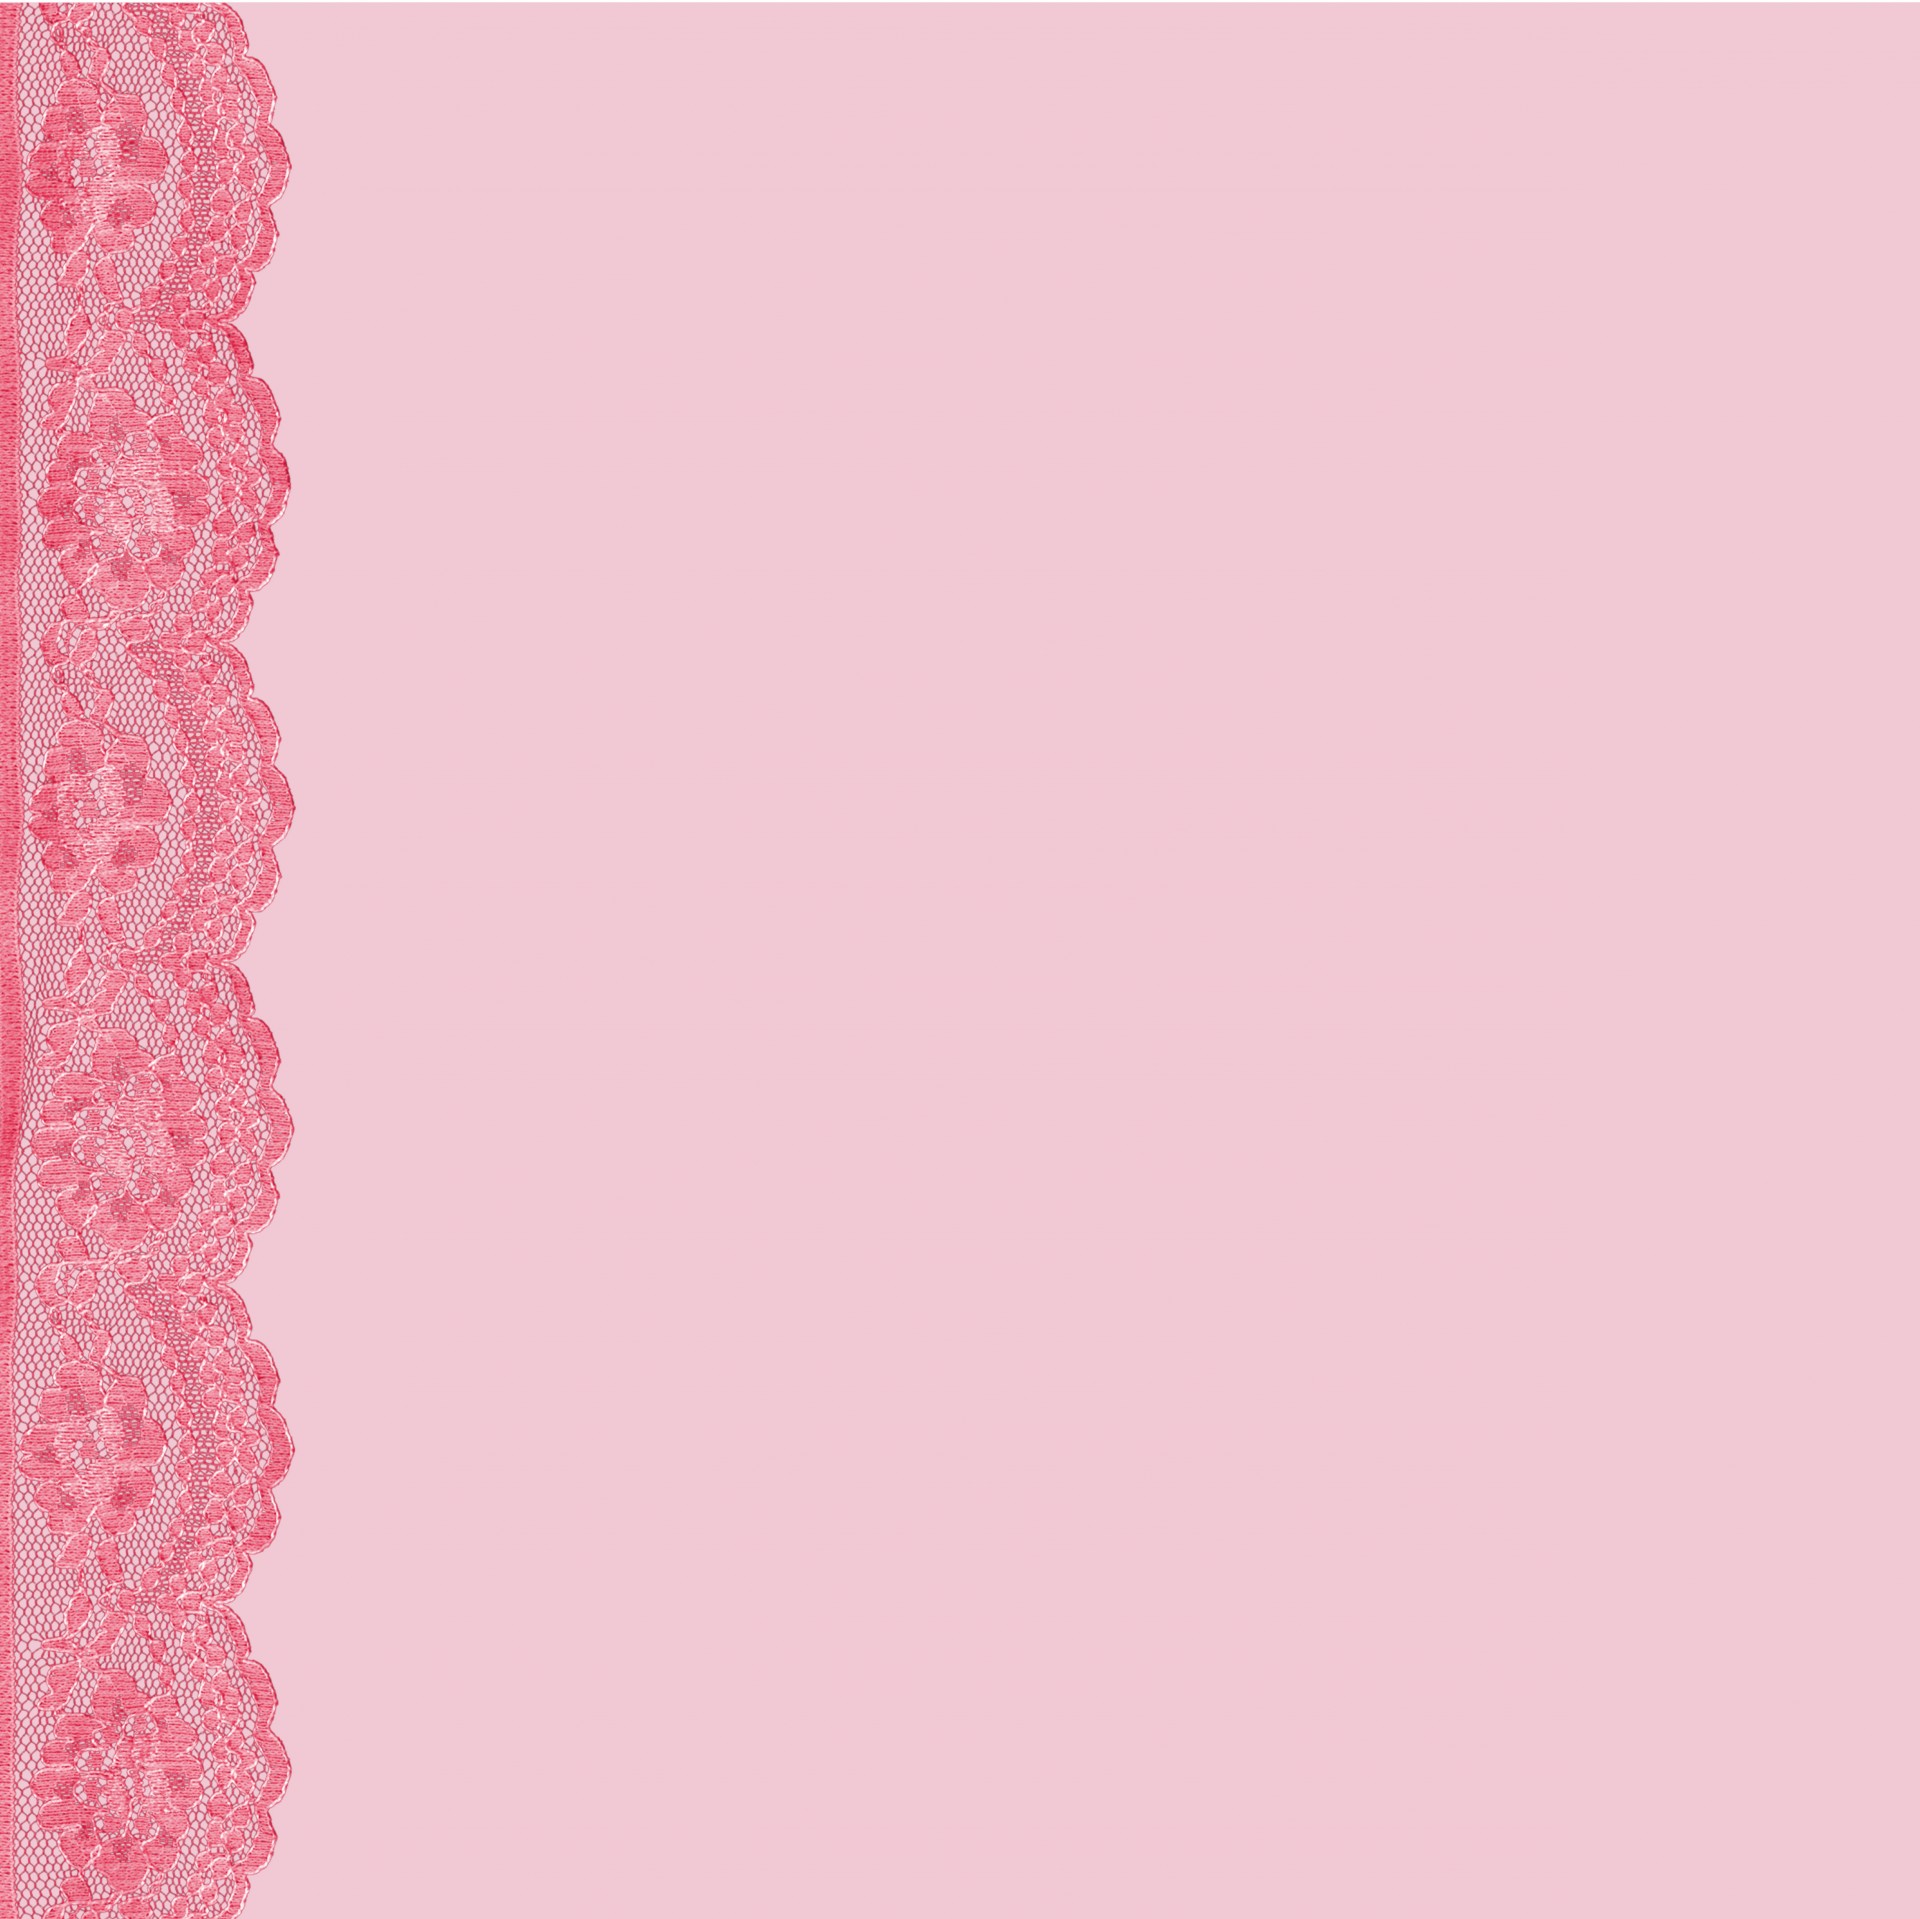 Pink,lace,background,card making,scrapbooking - free image from